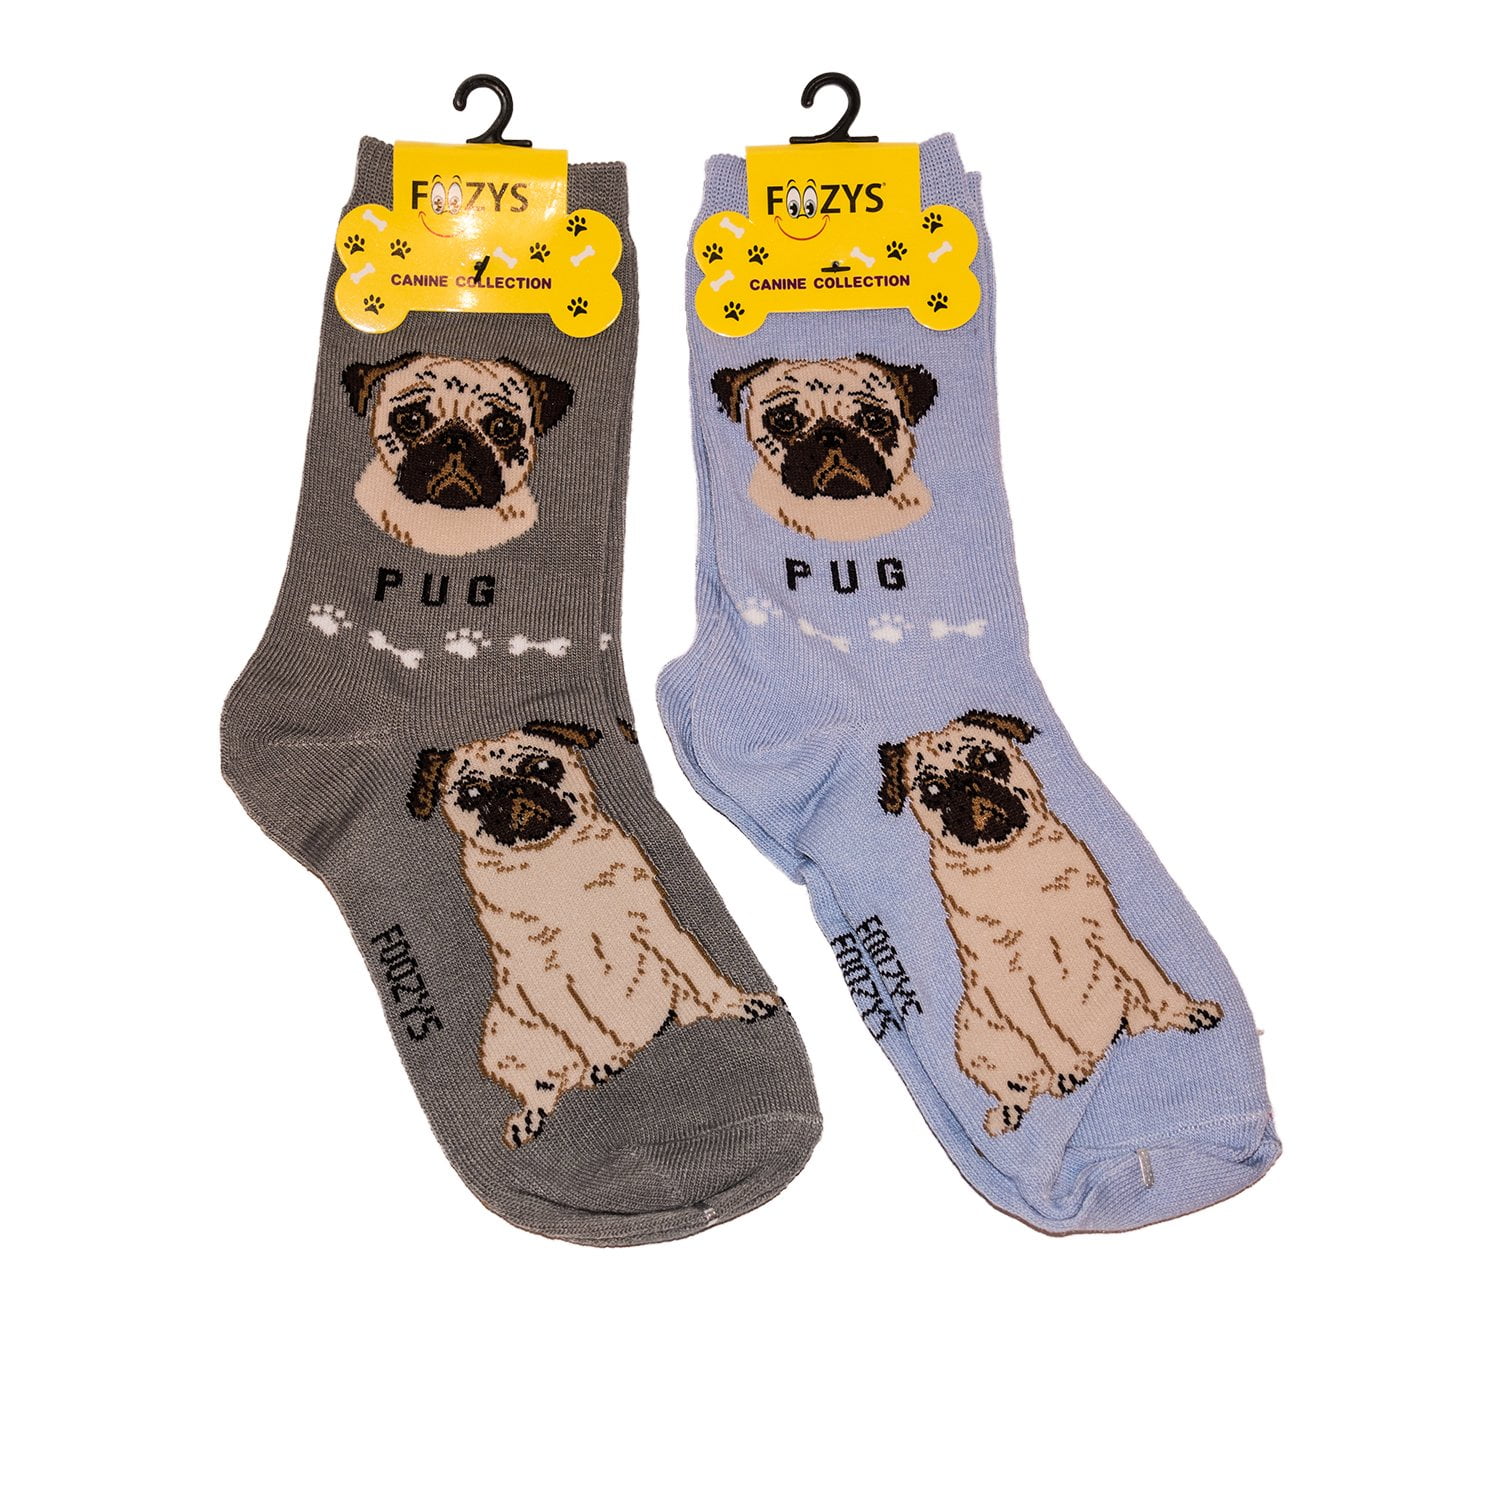 Wheaten Terrier Socks Unisex Dog Cotton/Poly One size fits most 